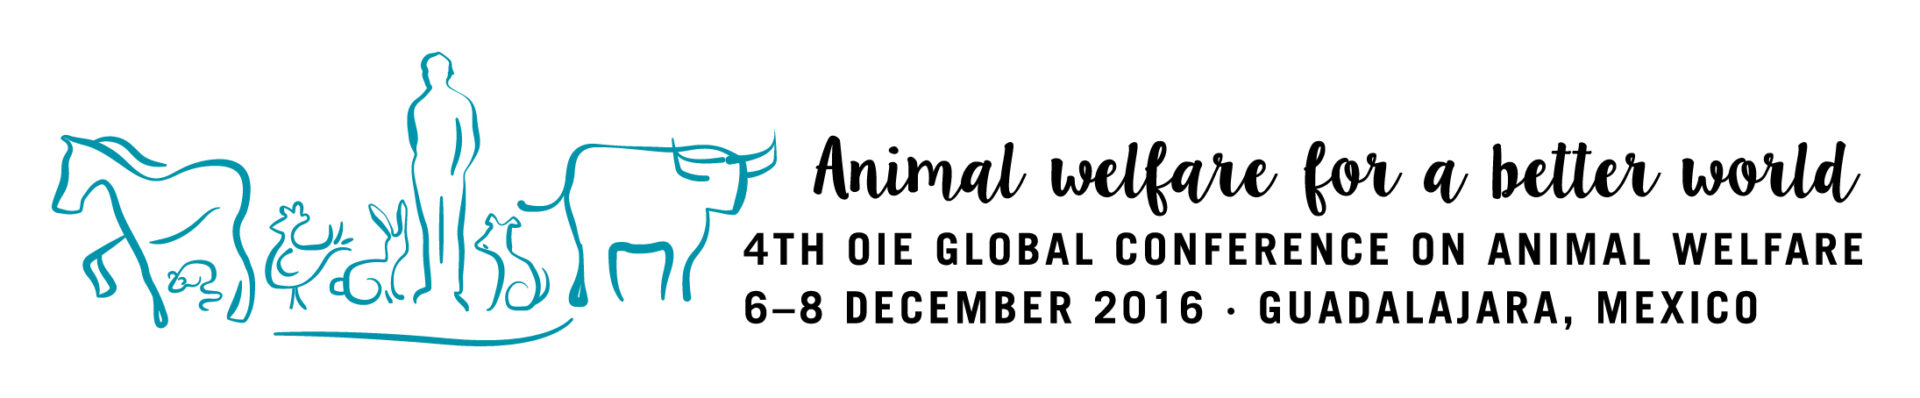 Communication with stakeholders through the OIE Global Conference on Animal Welfare